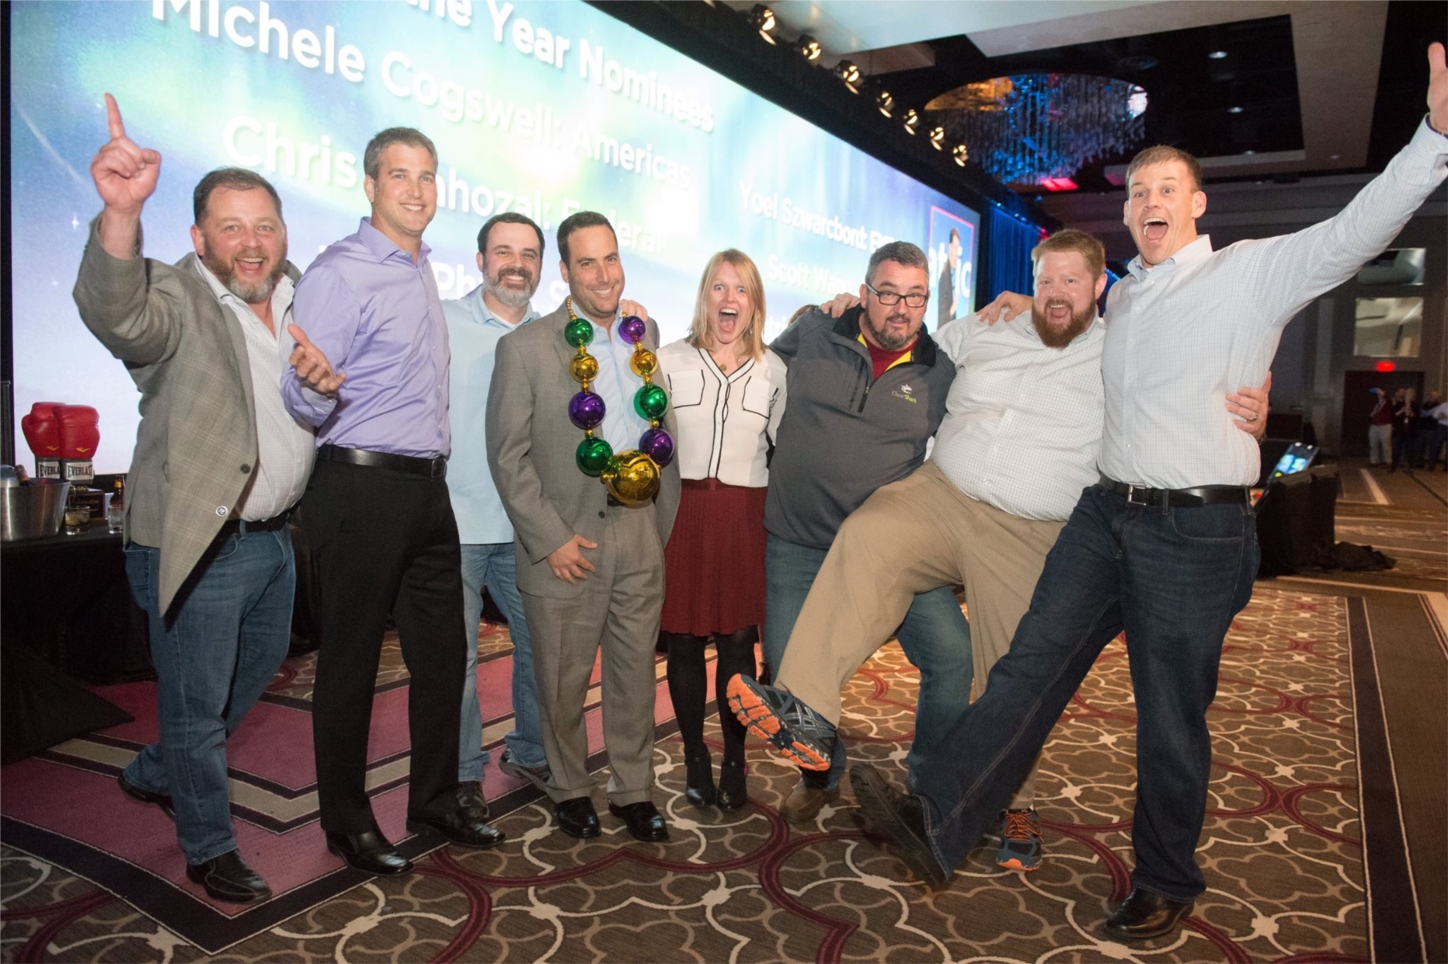 ClearShark is proud to have award-winning partnerships with industry leaders. Here we are winning FireEye Americas Partner of the Year this year!